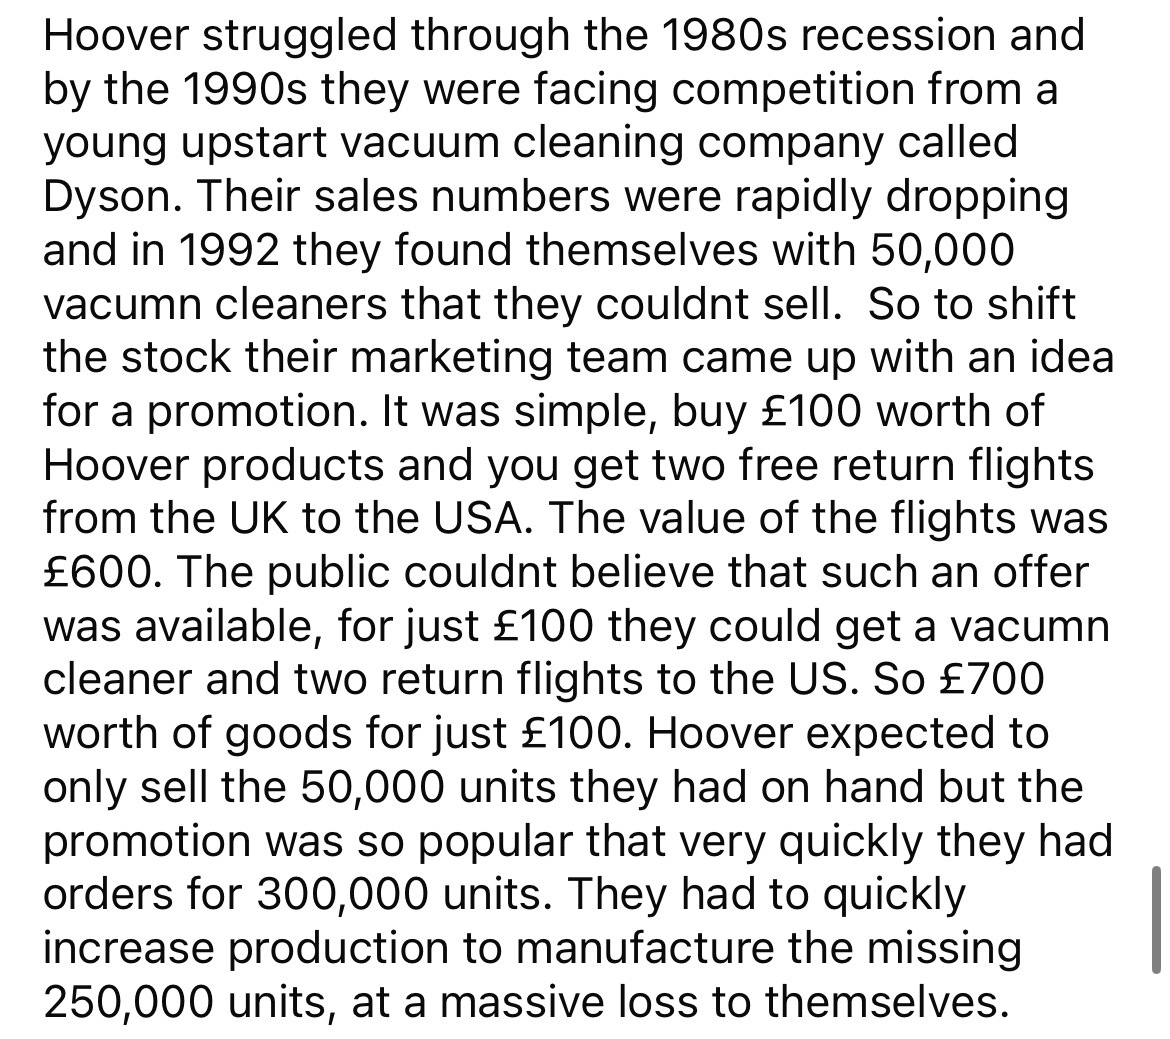 style - Hoover struggled through the 1980s recession and by the 1990s they were facing competition from a young upstart vacuum cleaning company called Dyson. Their sales numbers were rapidly dropping and in 1992 they found themselves with 50,000 vacumn cl